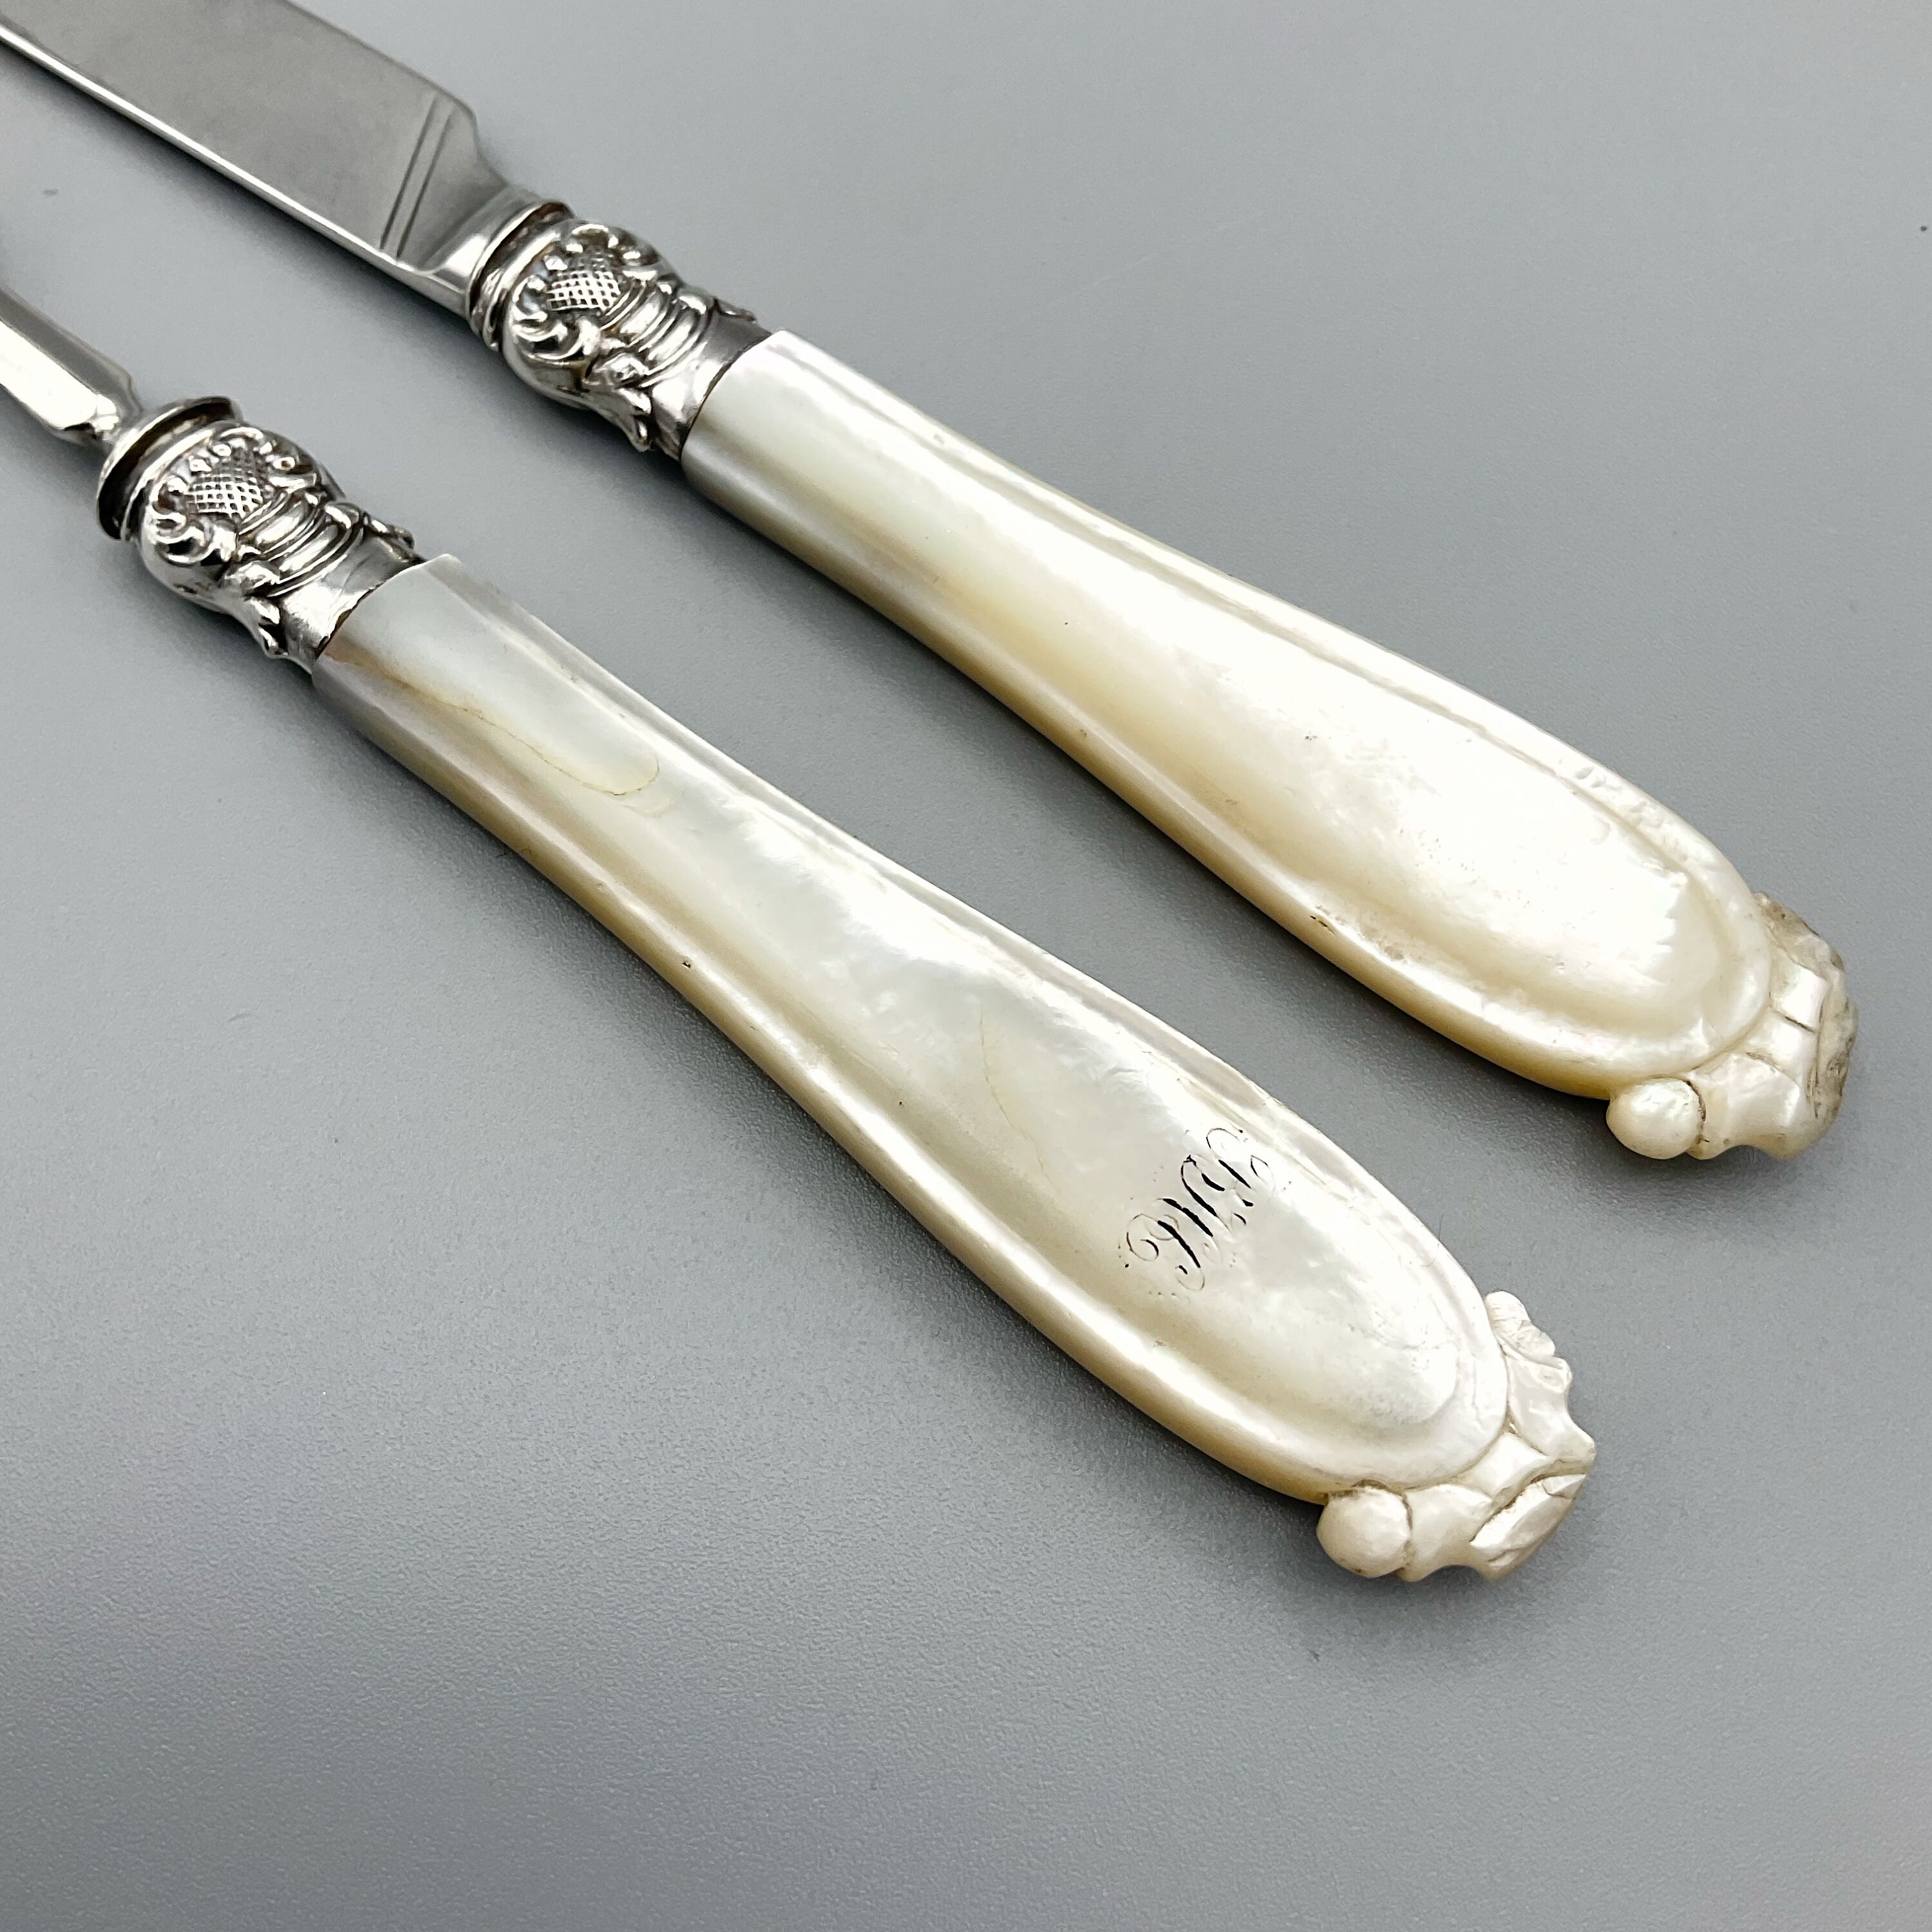 Antique Silver Knife and Fork, Victorian 1849 Hallmark, Travelling Cutlery,  Sterling Silver Blade, Mother of Pearl Handle, Campaign Cutlery 